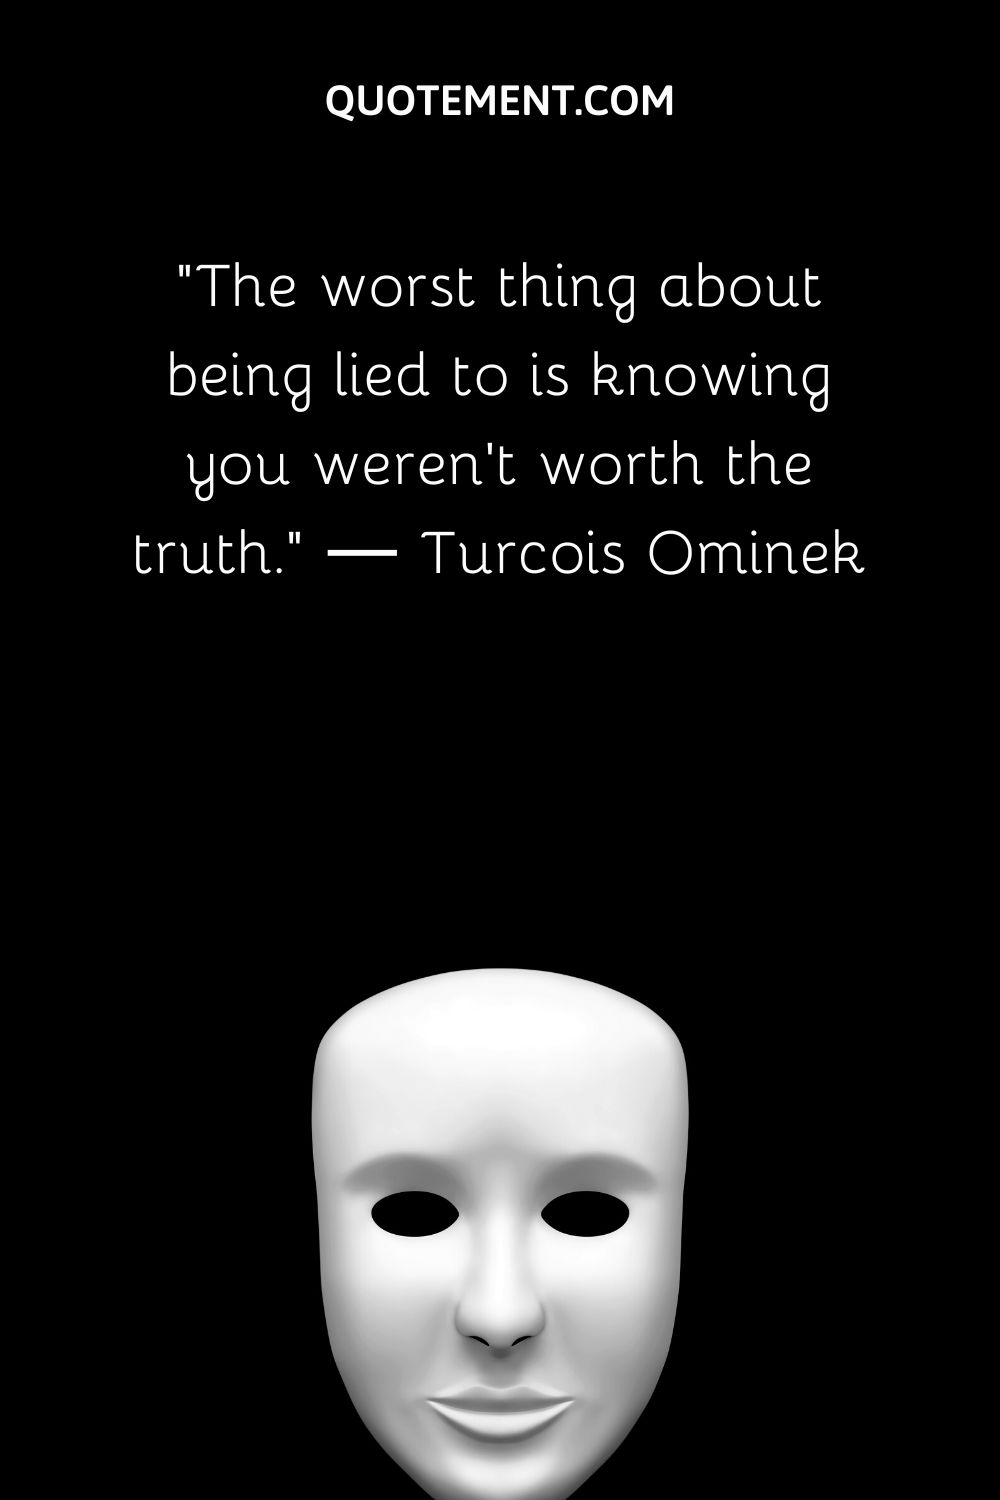 The worst thing about being lied to is knowing you weren’t worth the truth